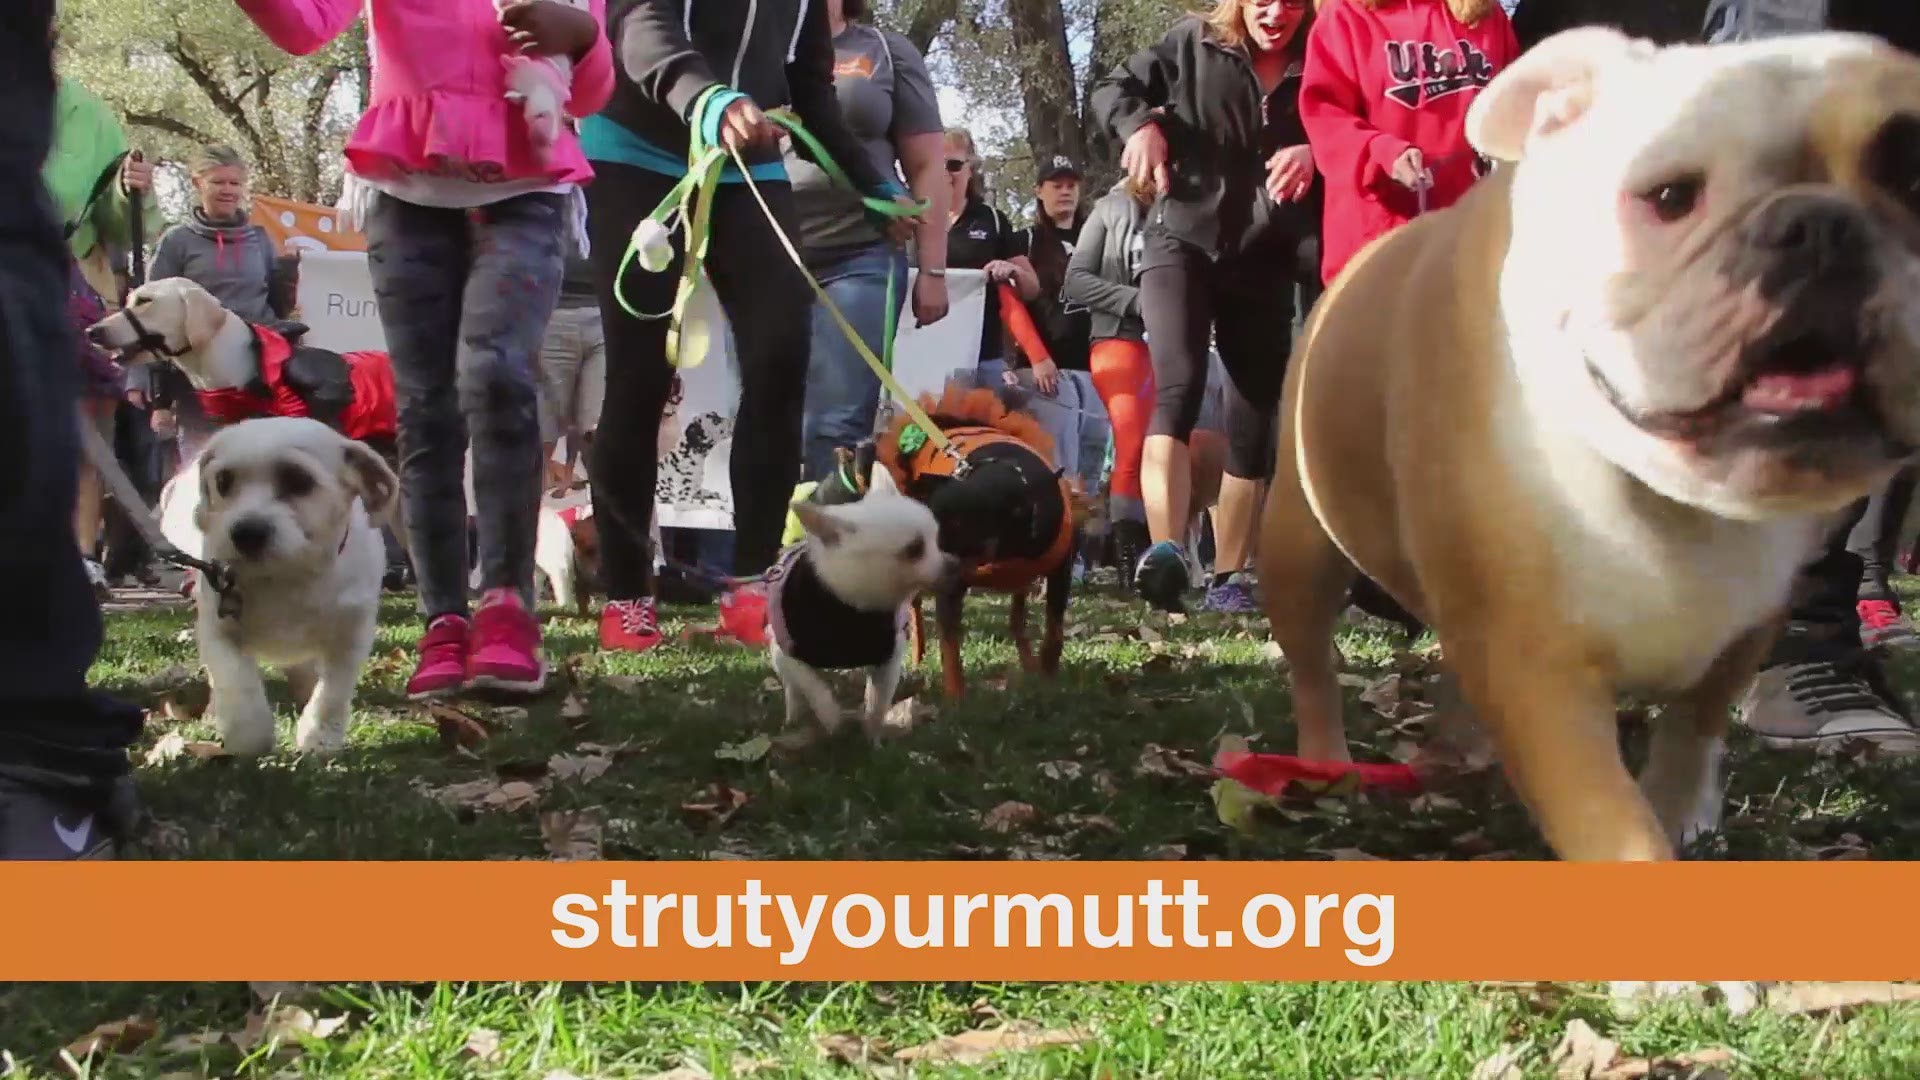 Strut Your Mutt is helping raise money for local rescues and shelters so we can be no-kill by 2025